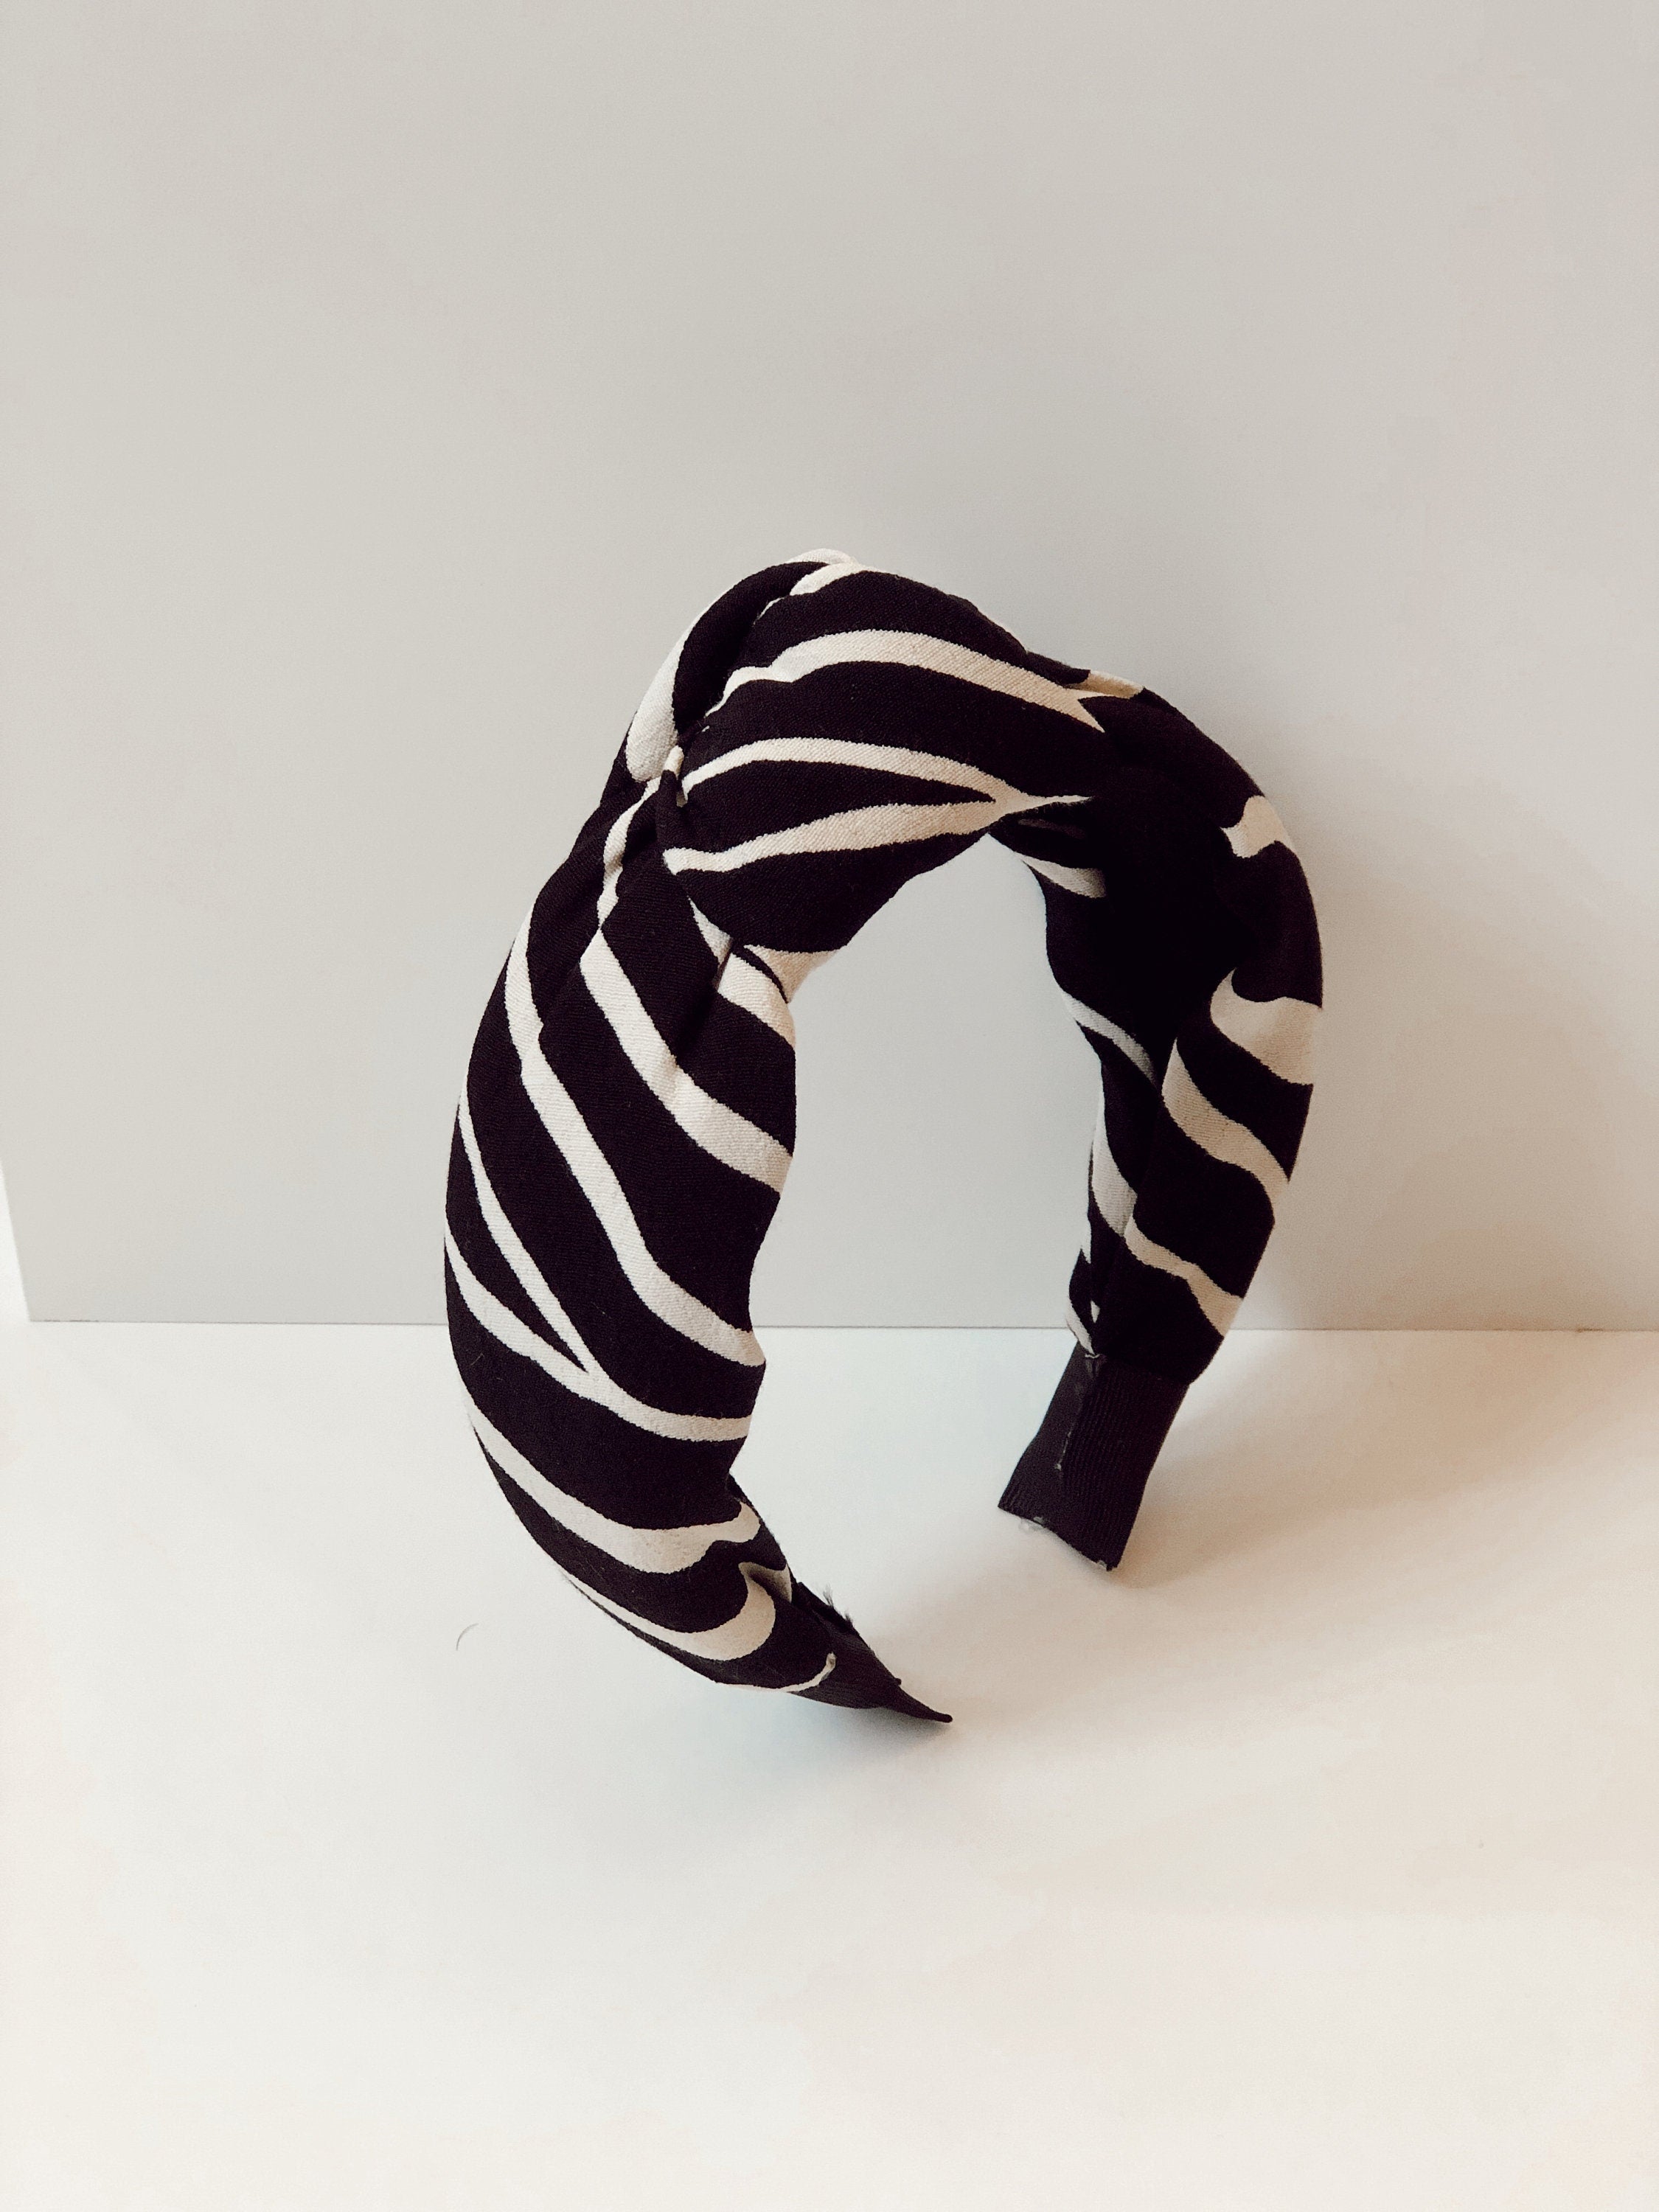 Add a touch of sophistication to any outfit with this knotted headband featuring a chic zebra pattern.